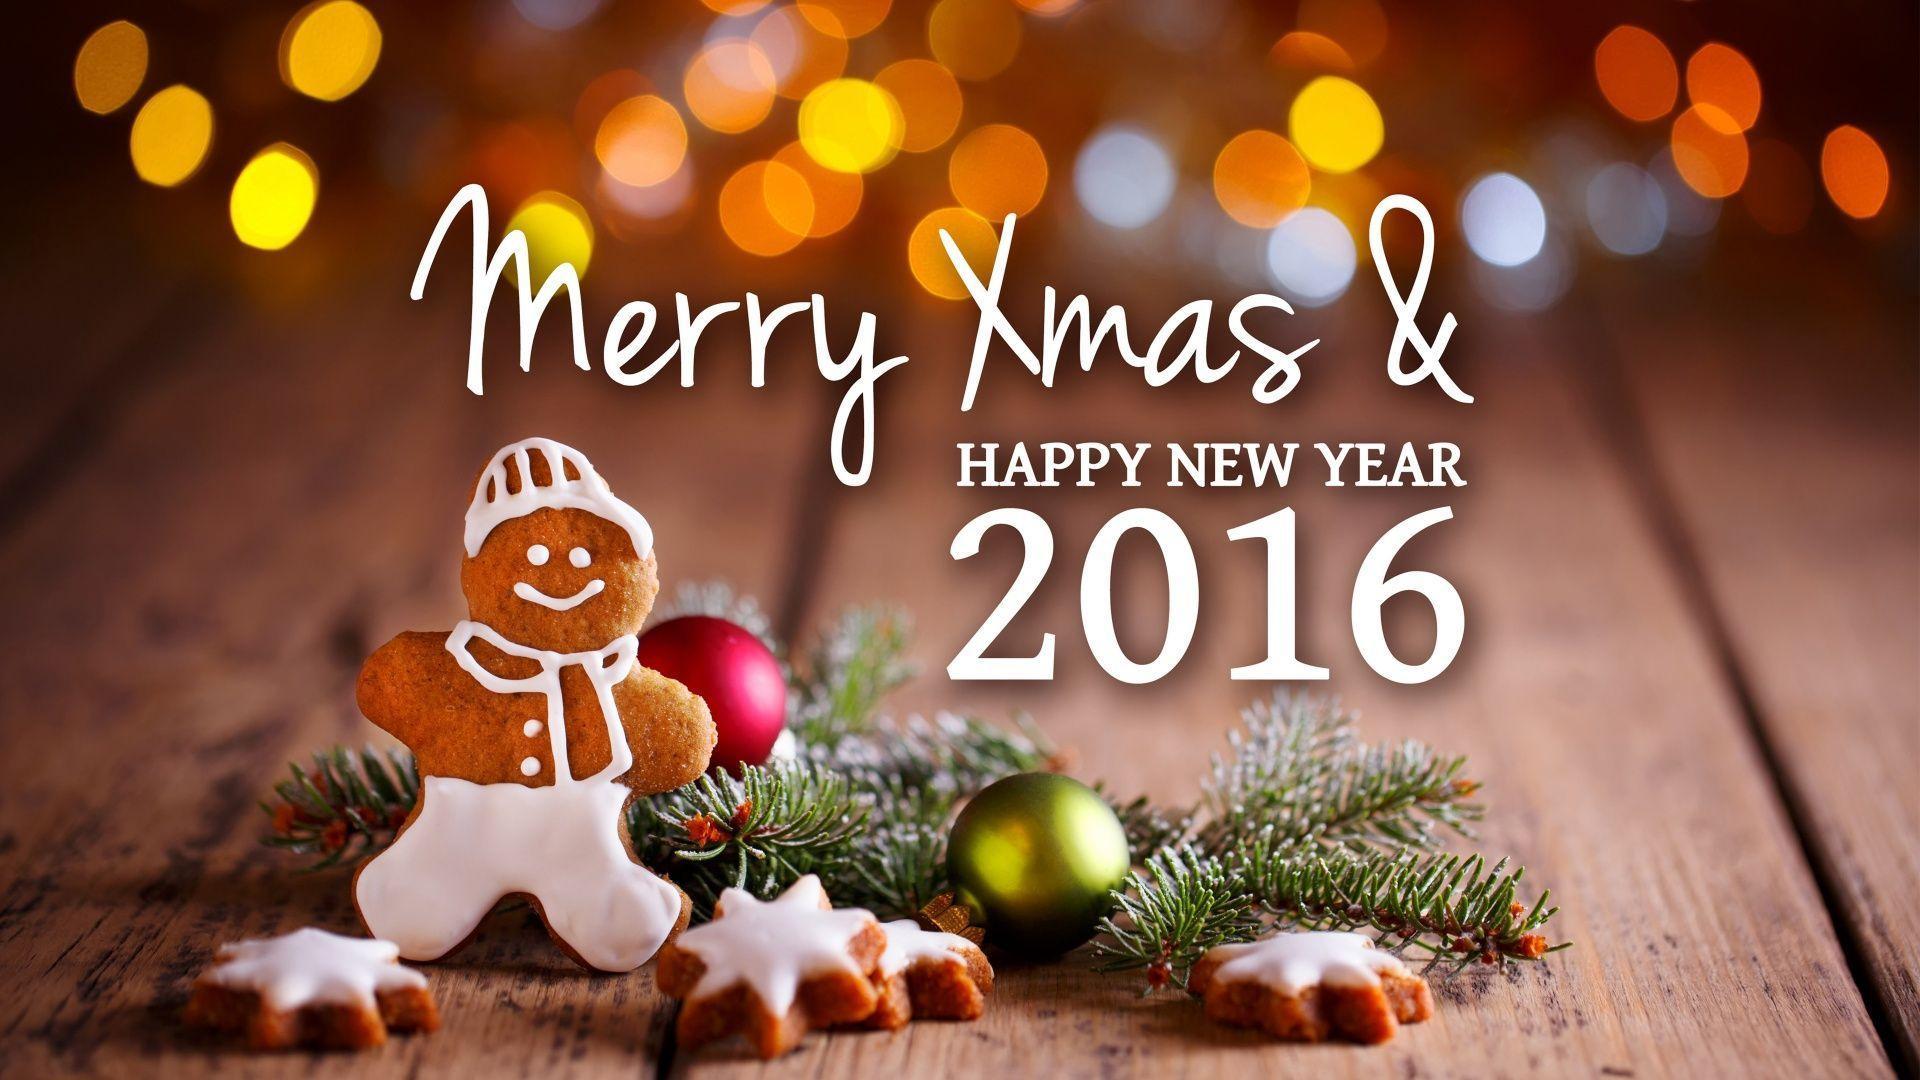 Merry Xmas and Happy New Year 2016 HD Wallpaper